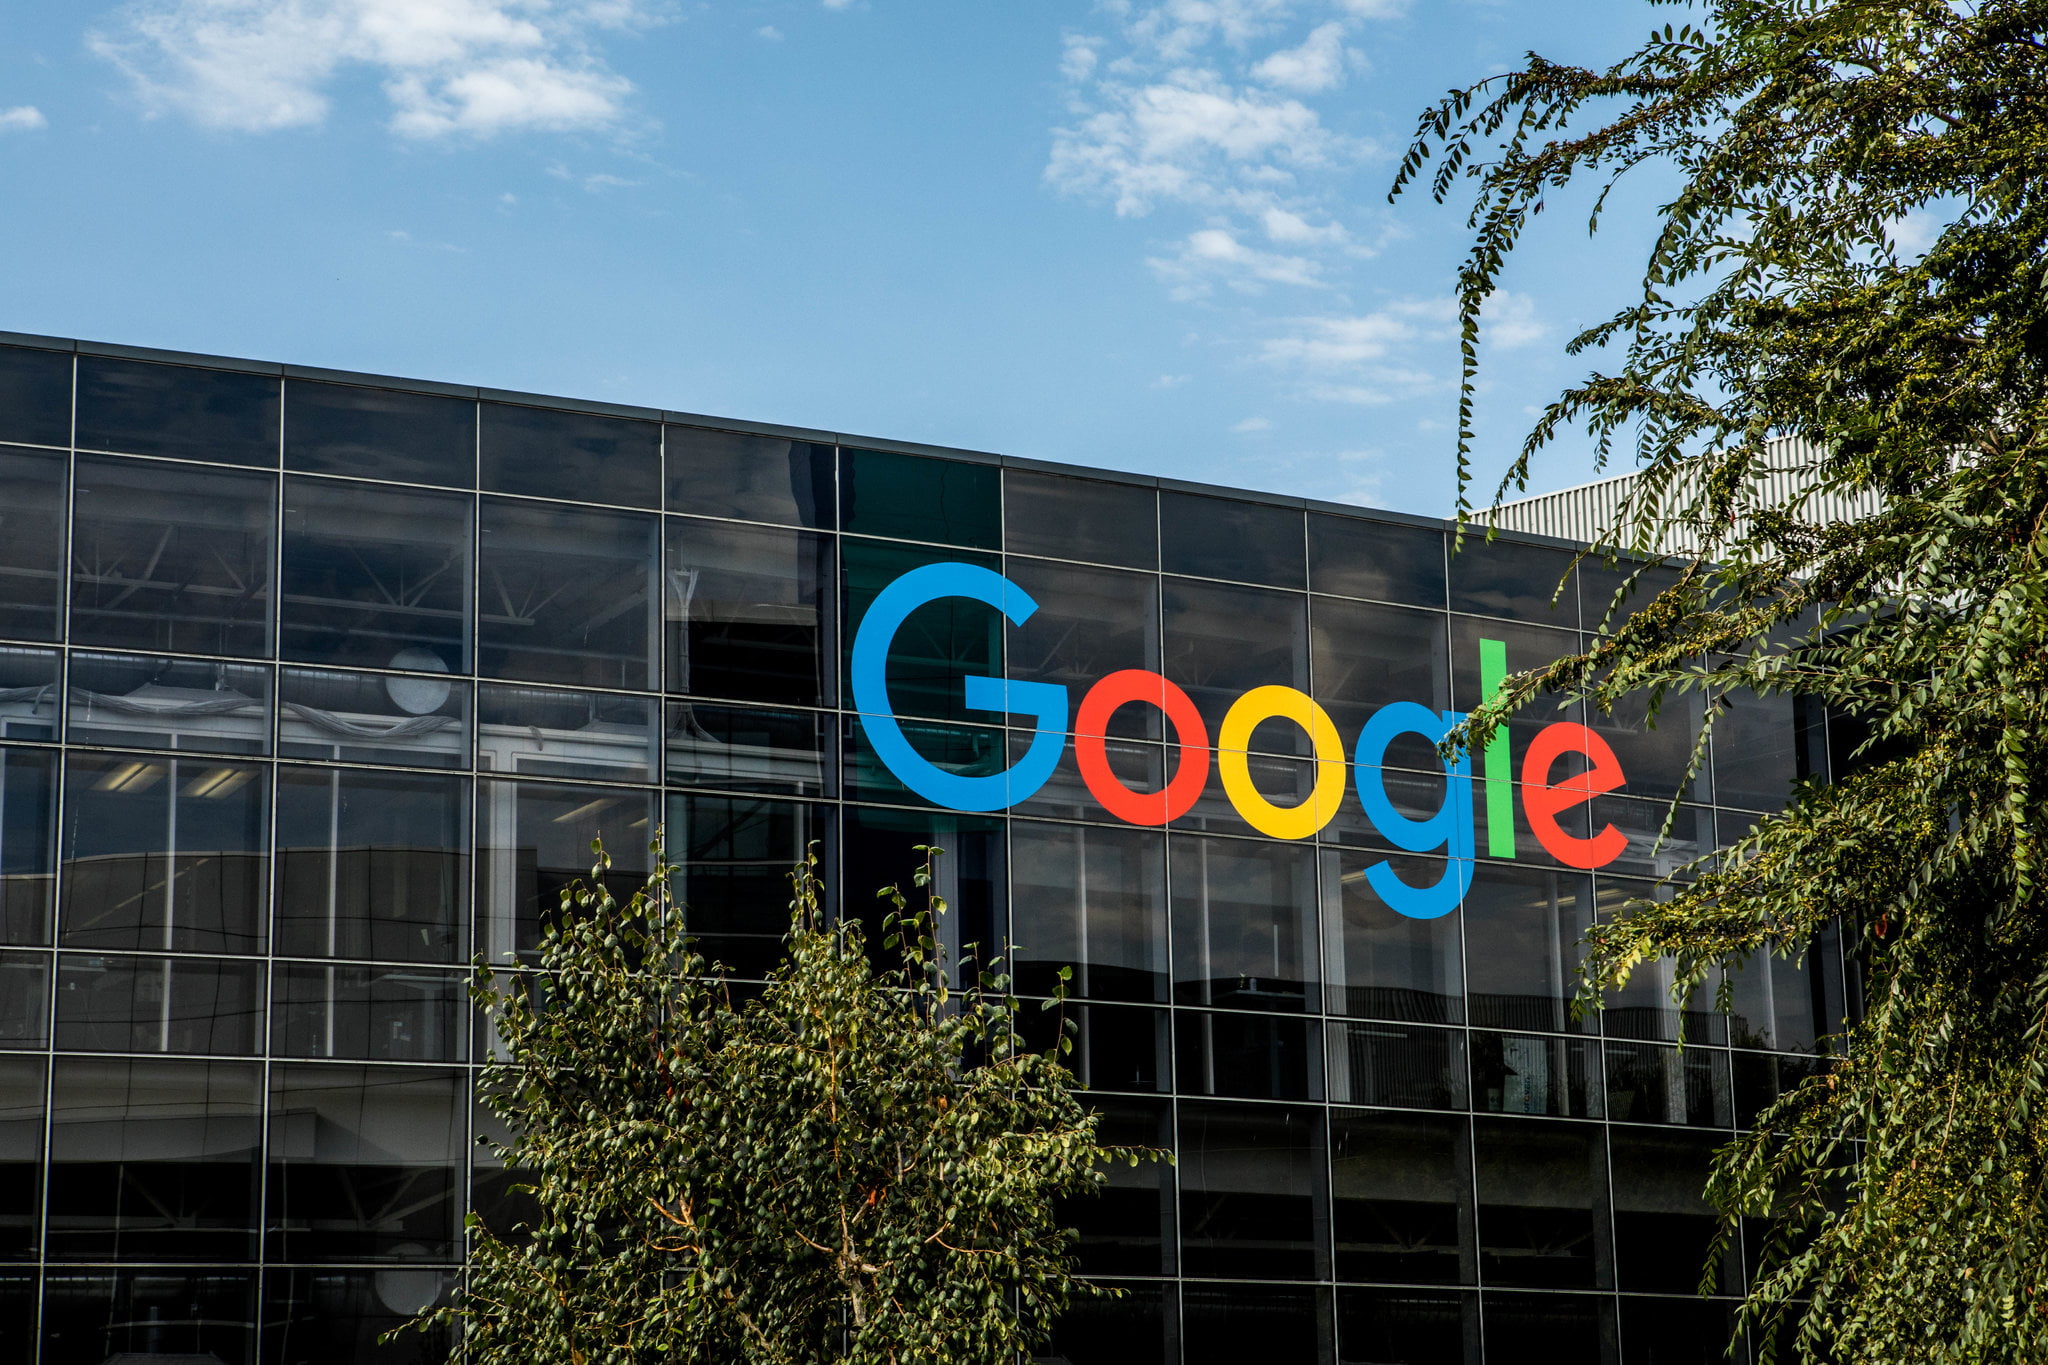 Google has a new activity and storage quota policy